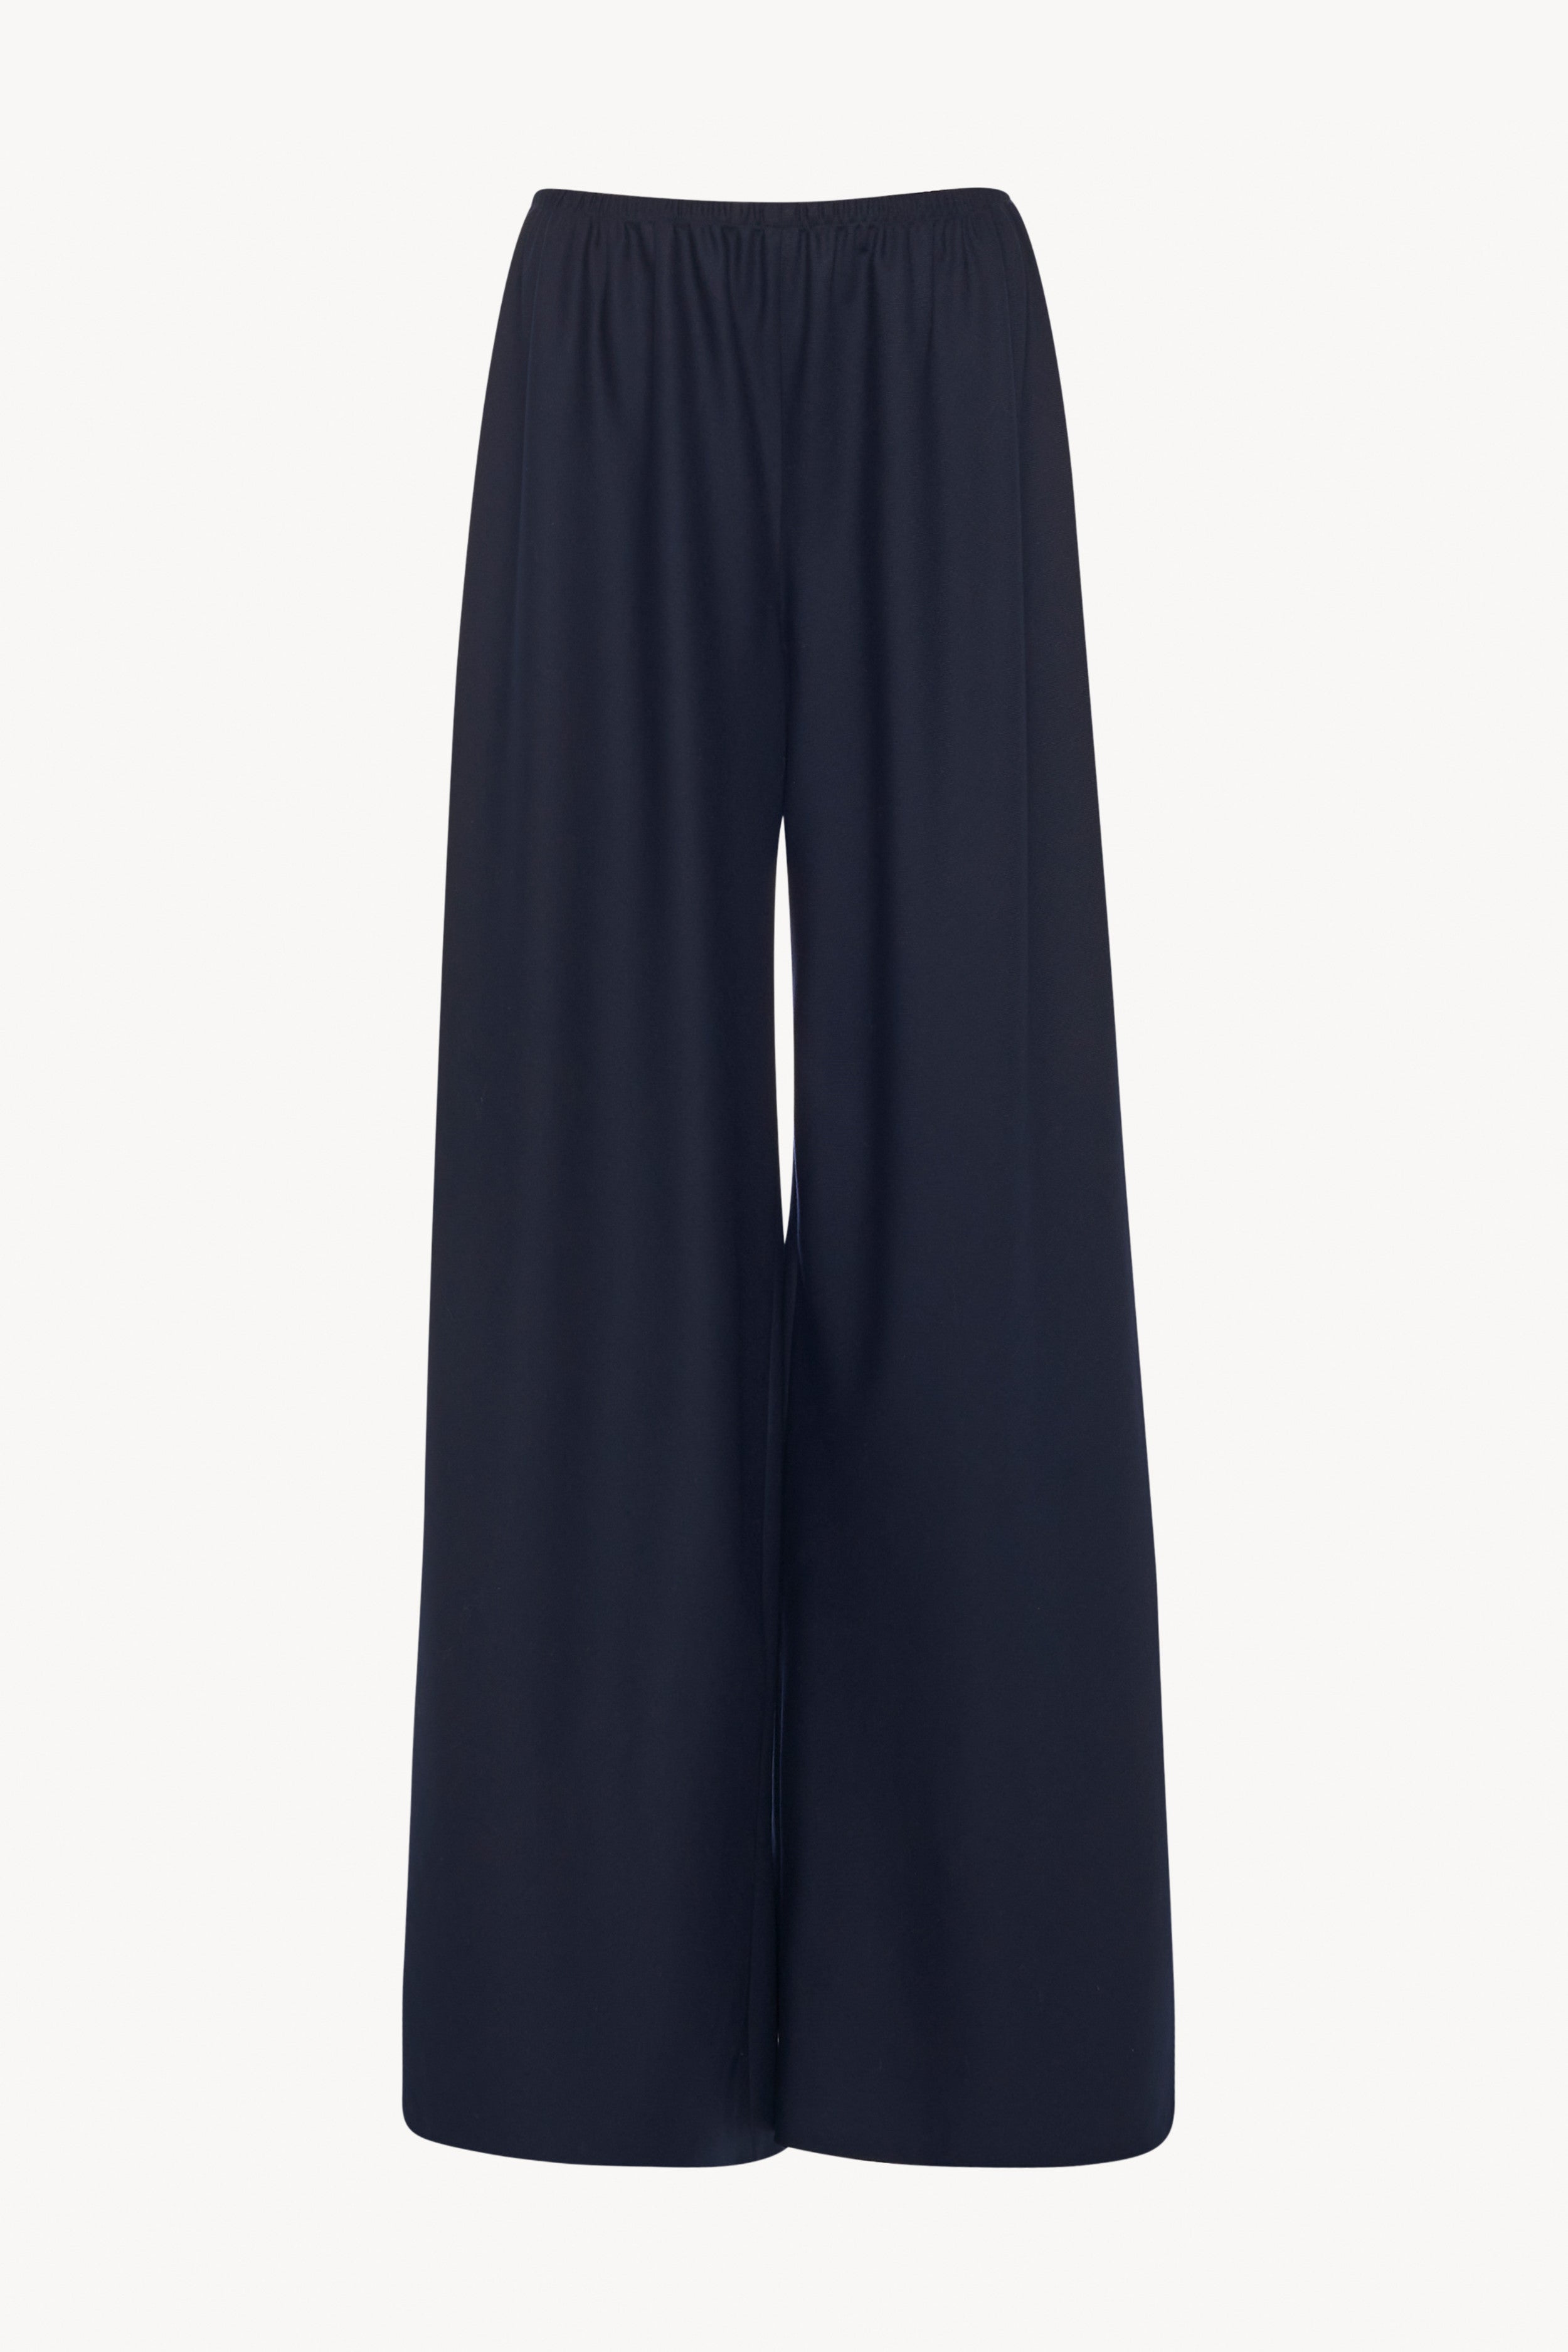 Gala Pant Blue in Cady – The Row